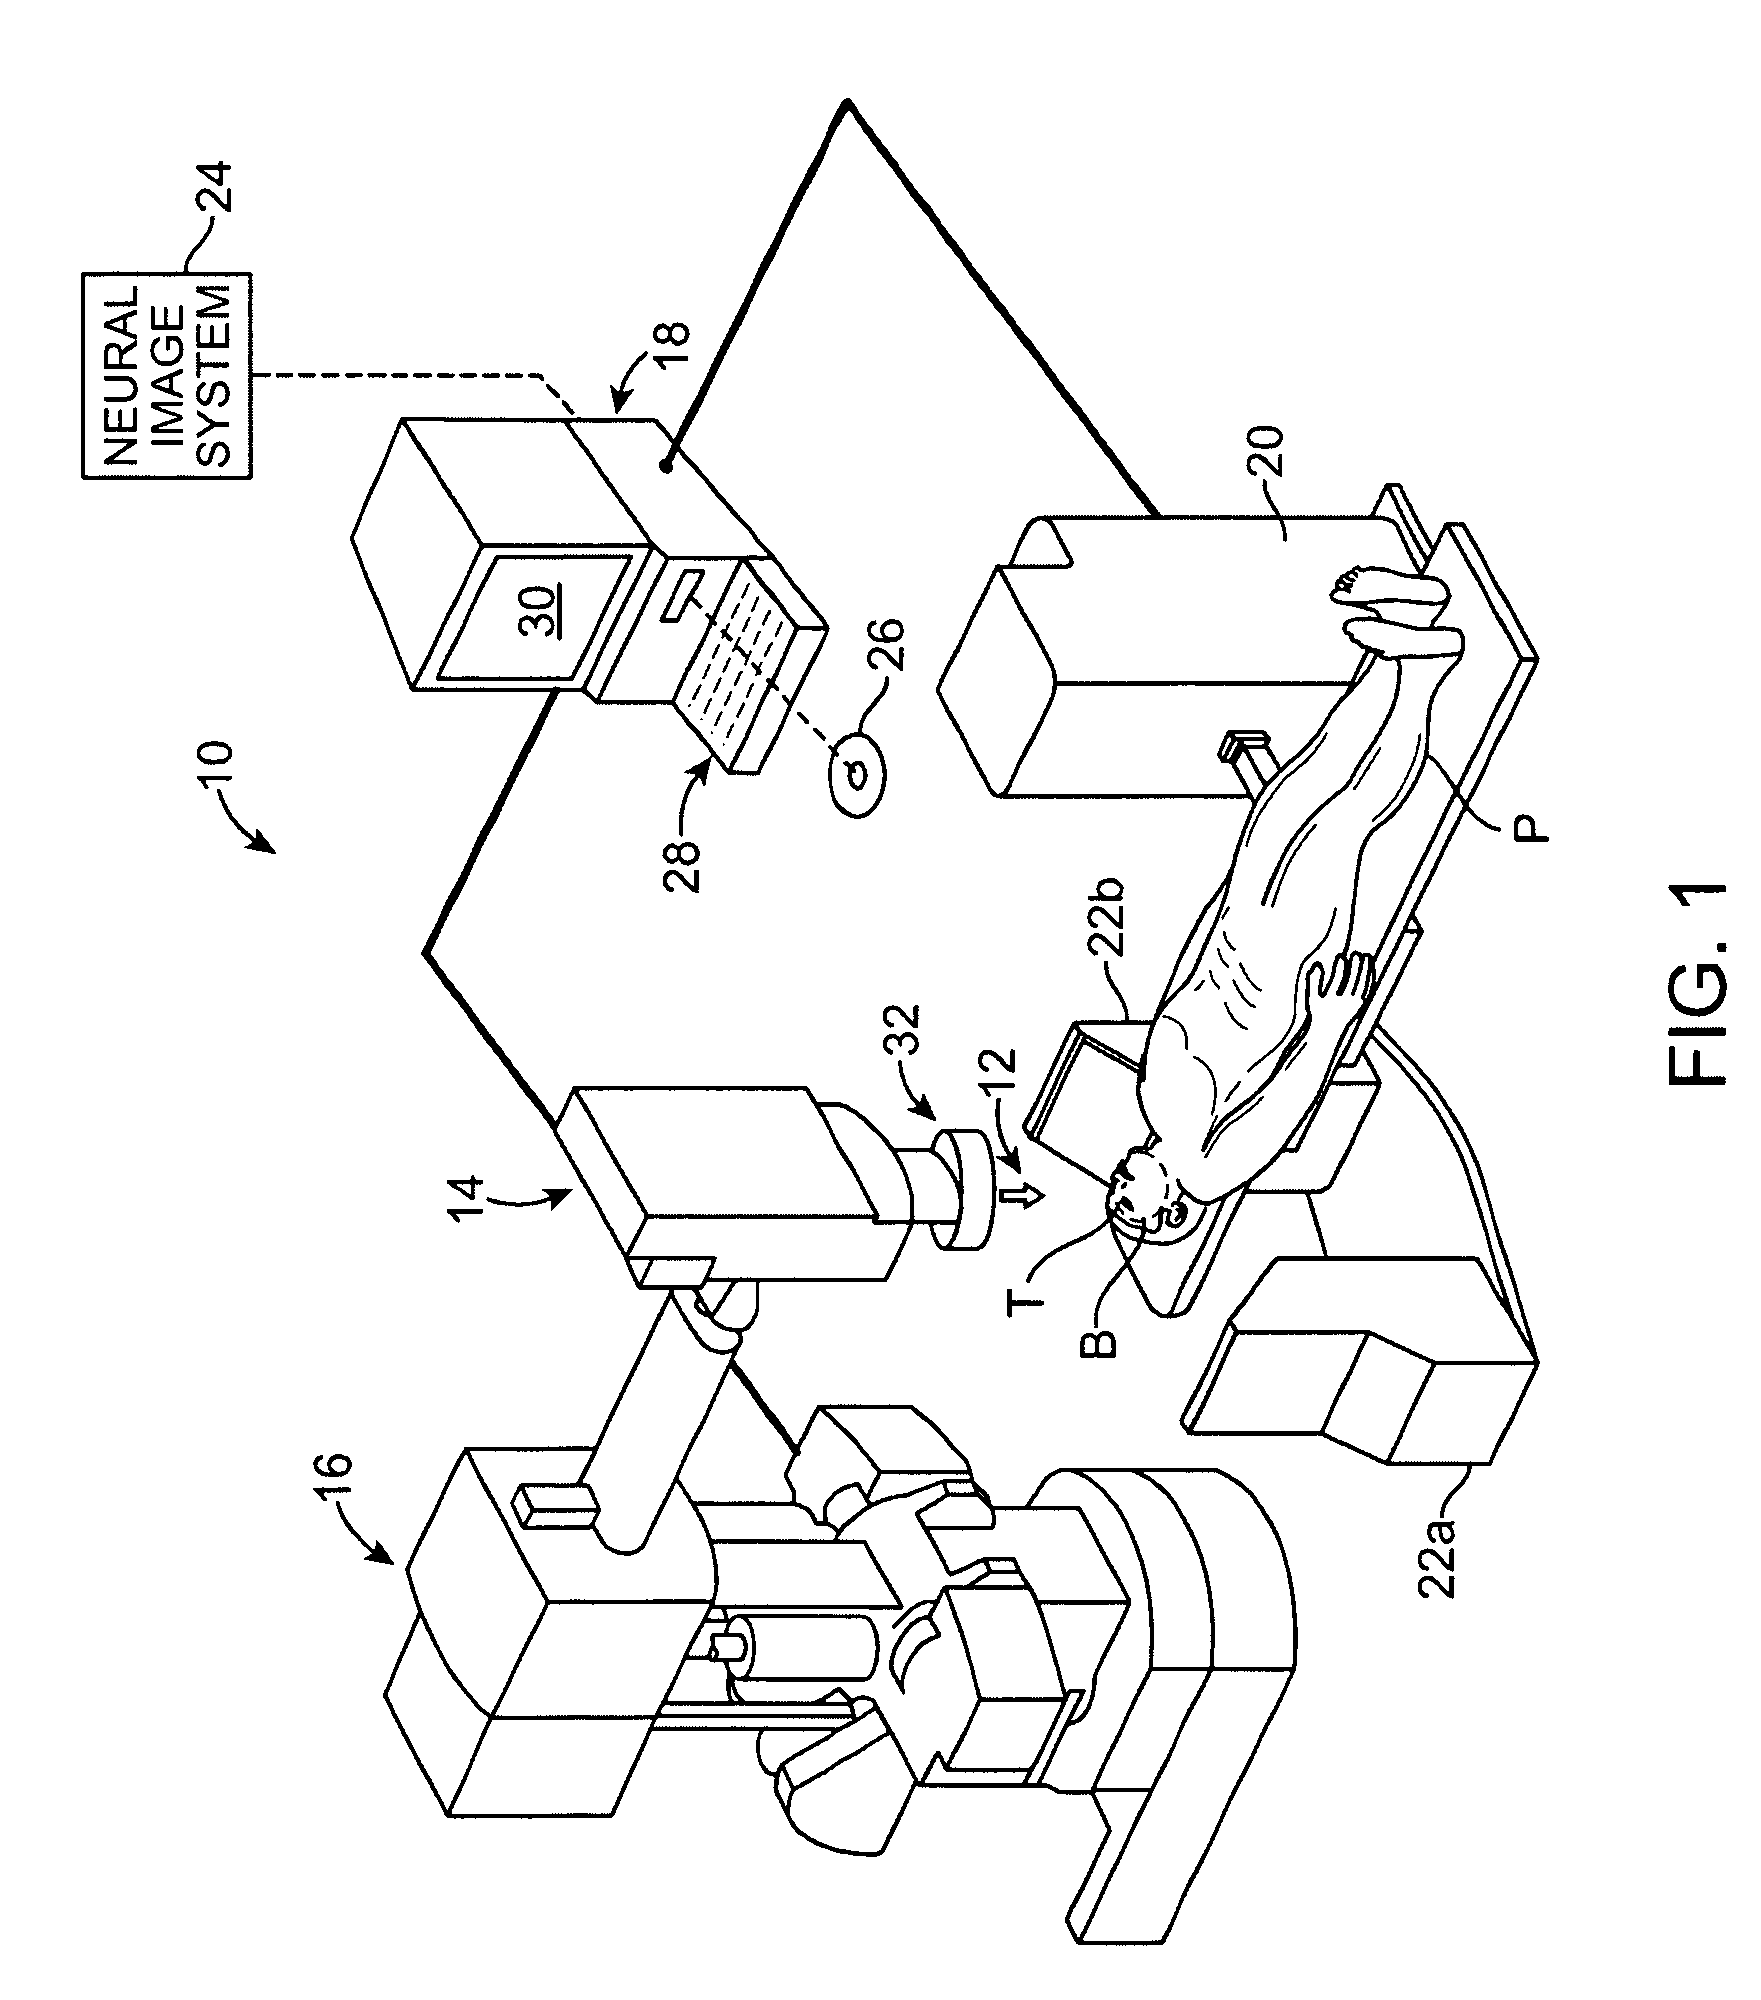 Radiosurgical neuromodulation devices, systems, and methods for treatment of behavioral disorders by external application of ionizing radiation